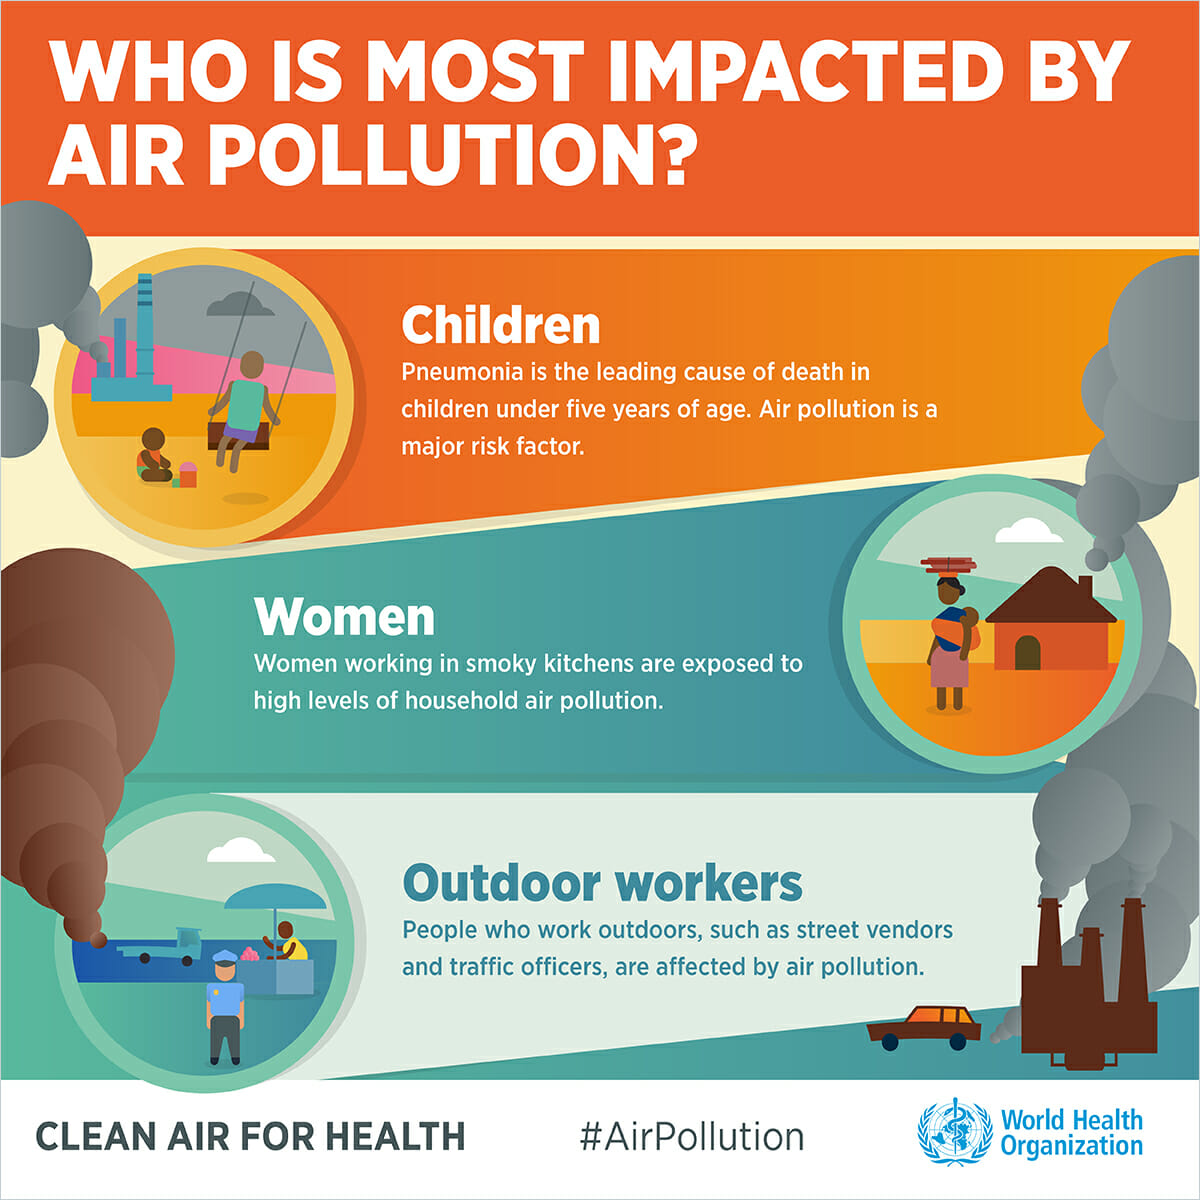 9 out of 10 people worldwide breathe polluted air, but more countries are taking action